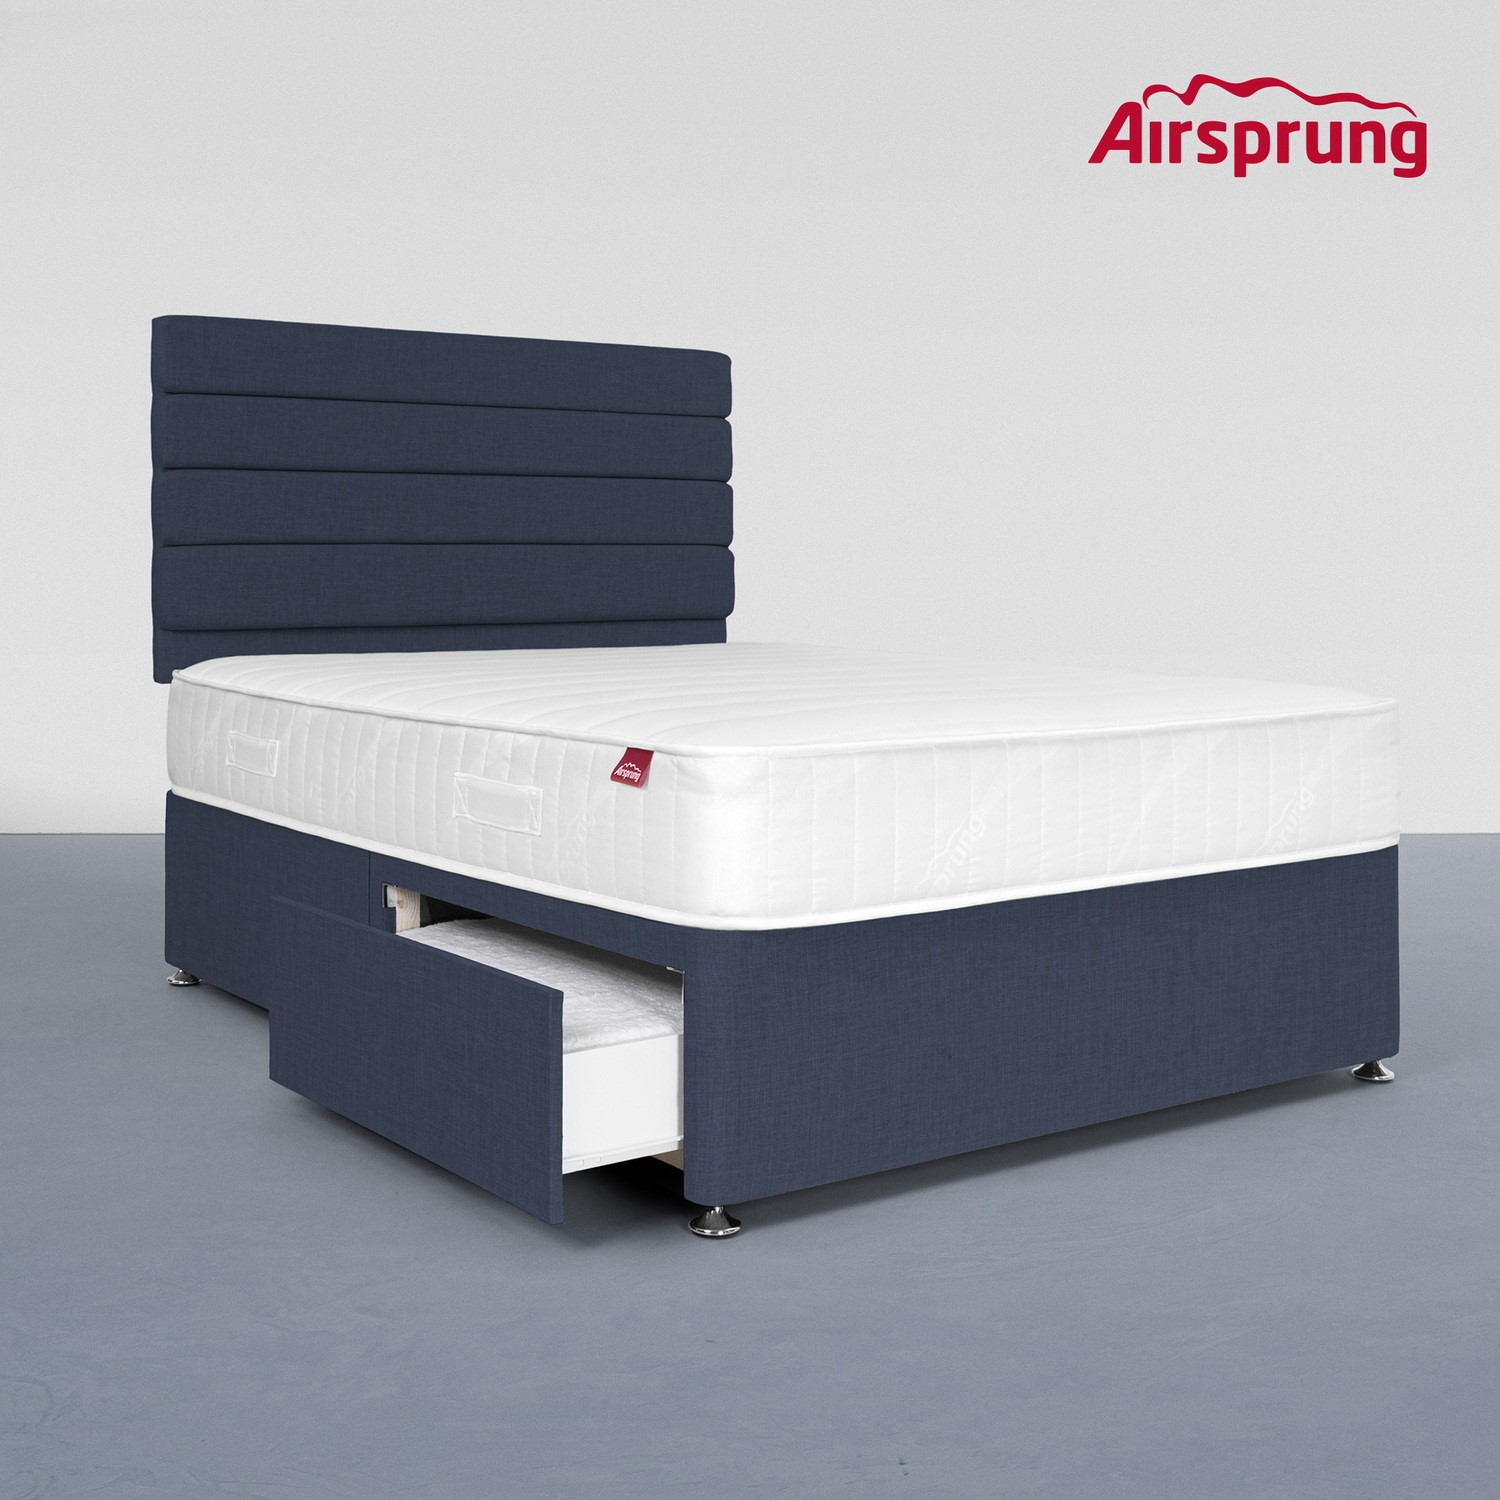 Read more about Airsprung double 2 drawer divan bed with comfort mattress midnight blue